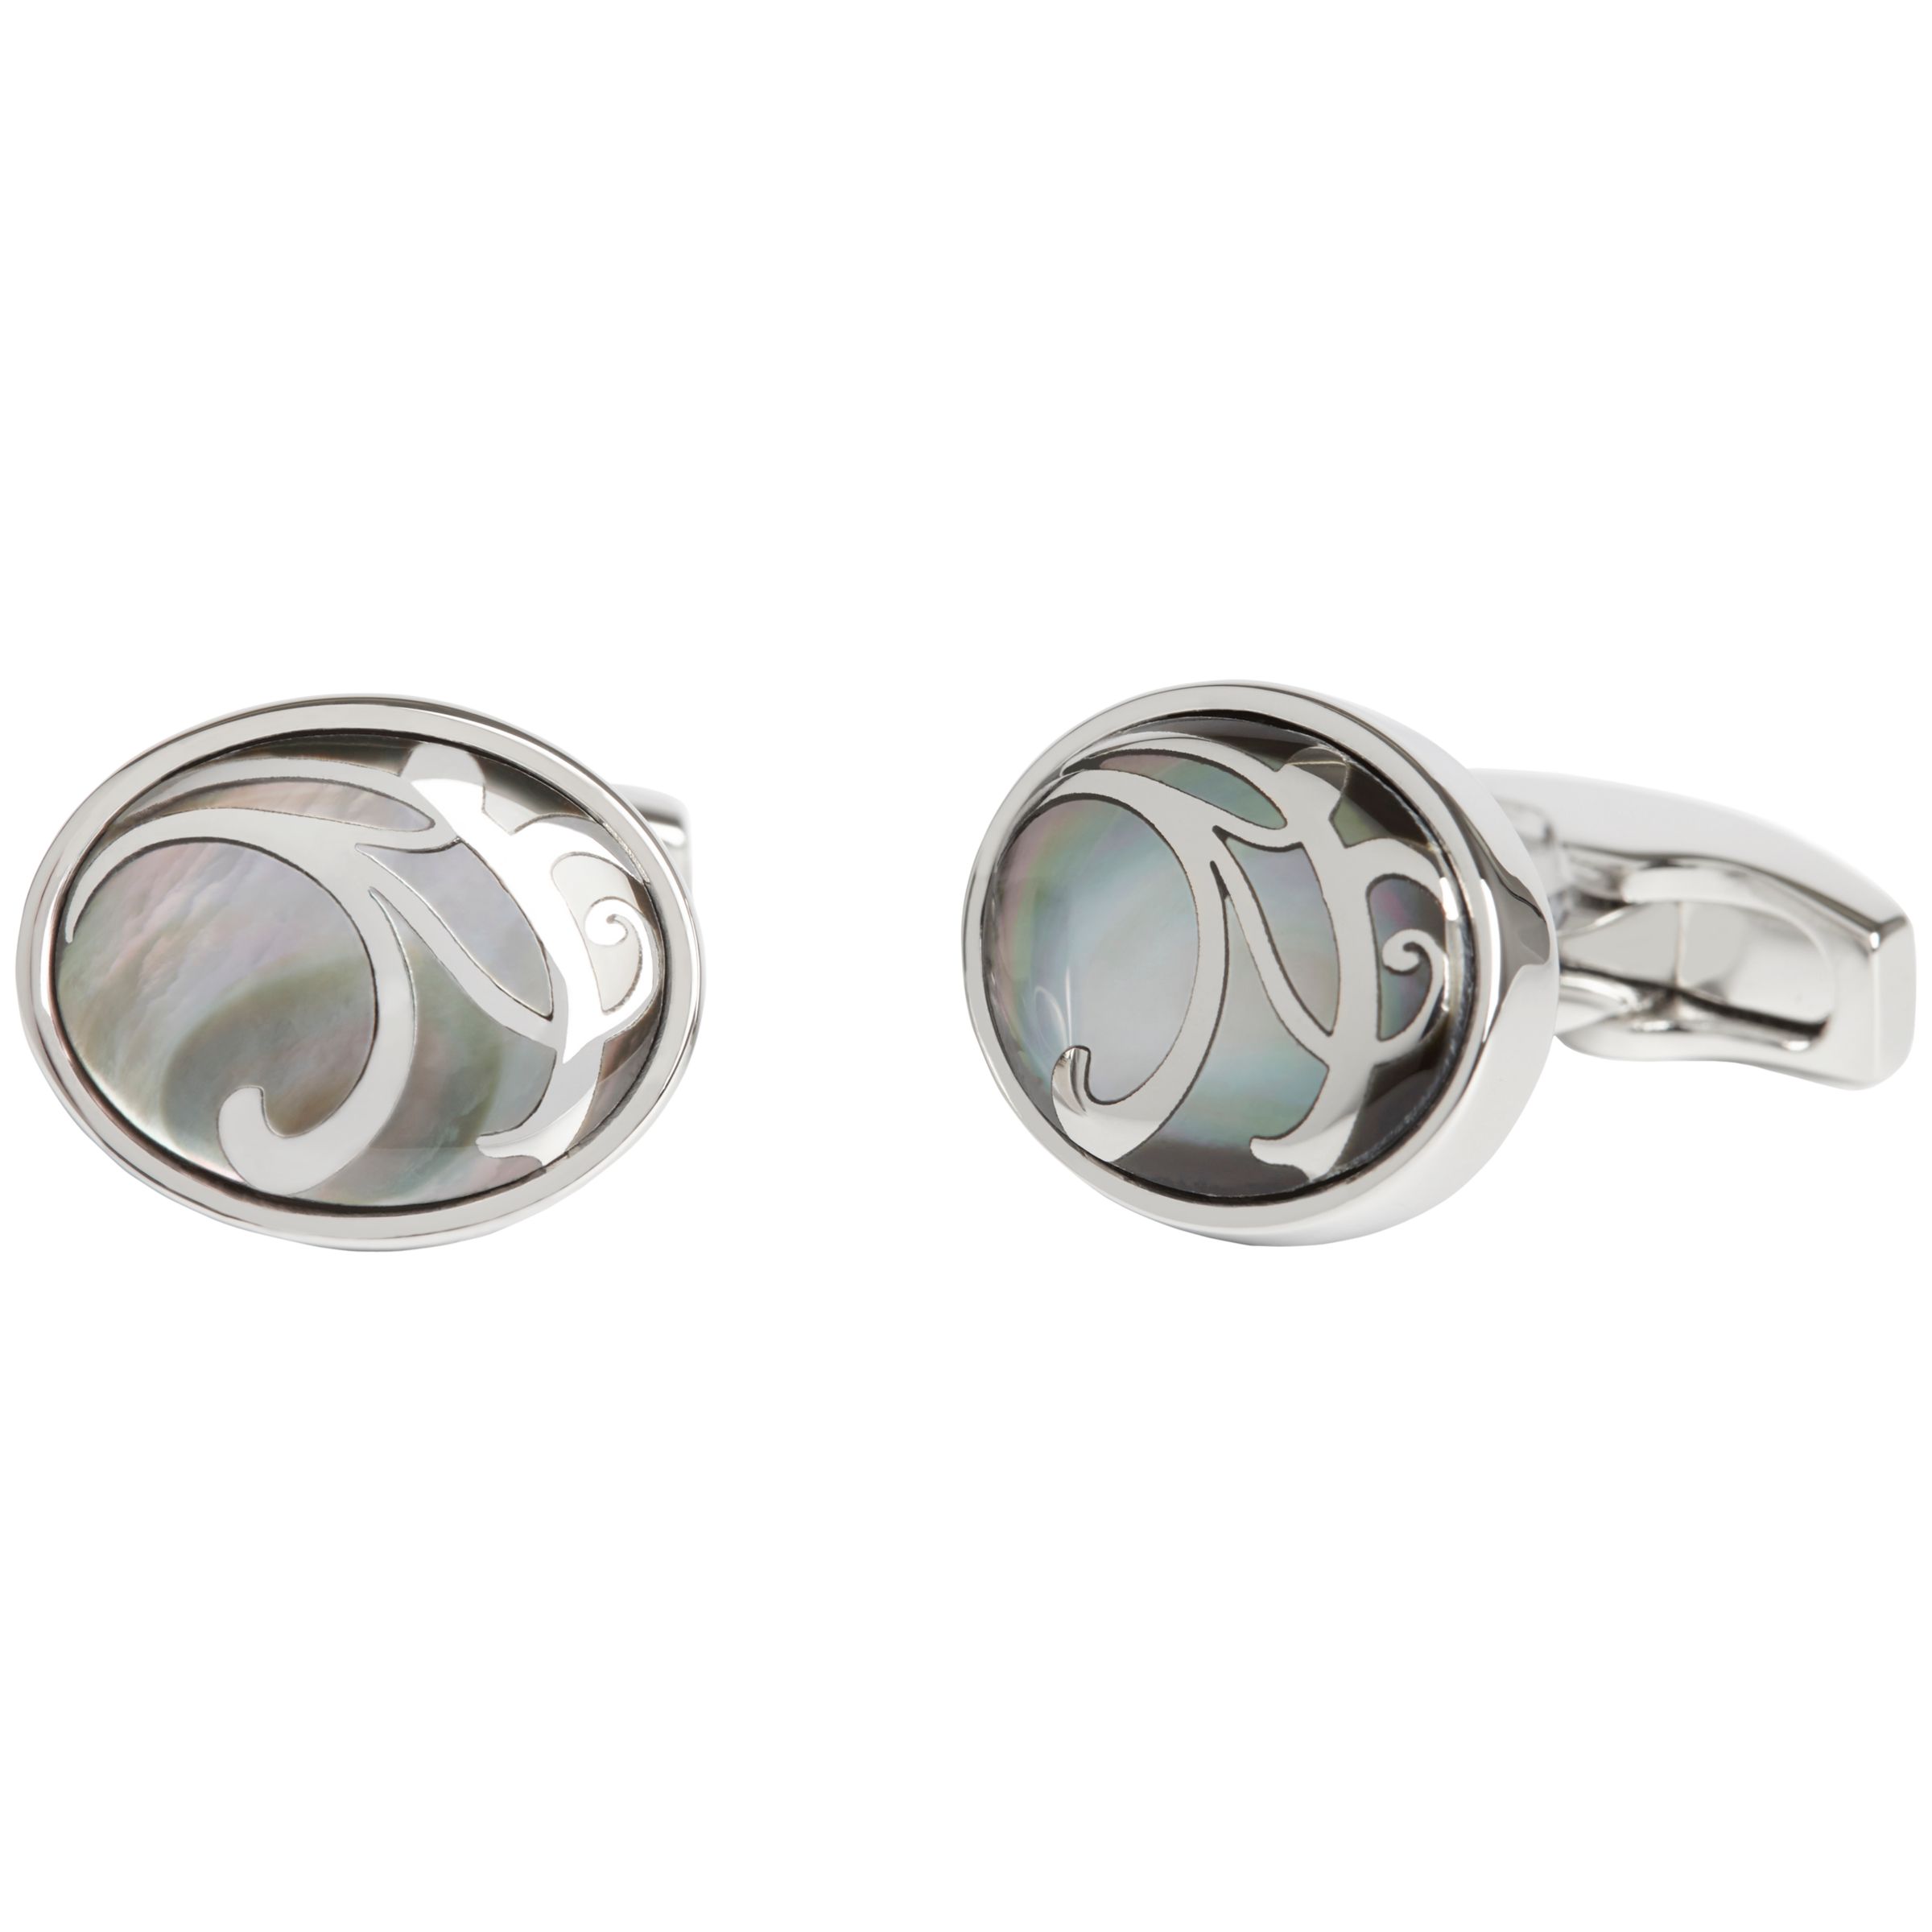 Buy Simon Carter Maurice Mother of Pearl Cufflinks, Grey Online at johnlewis.com